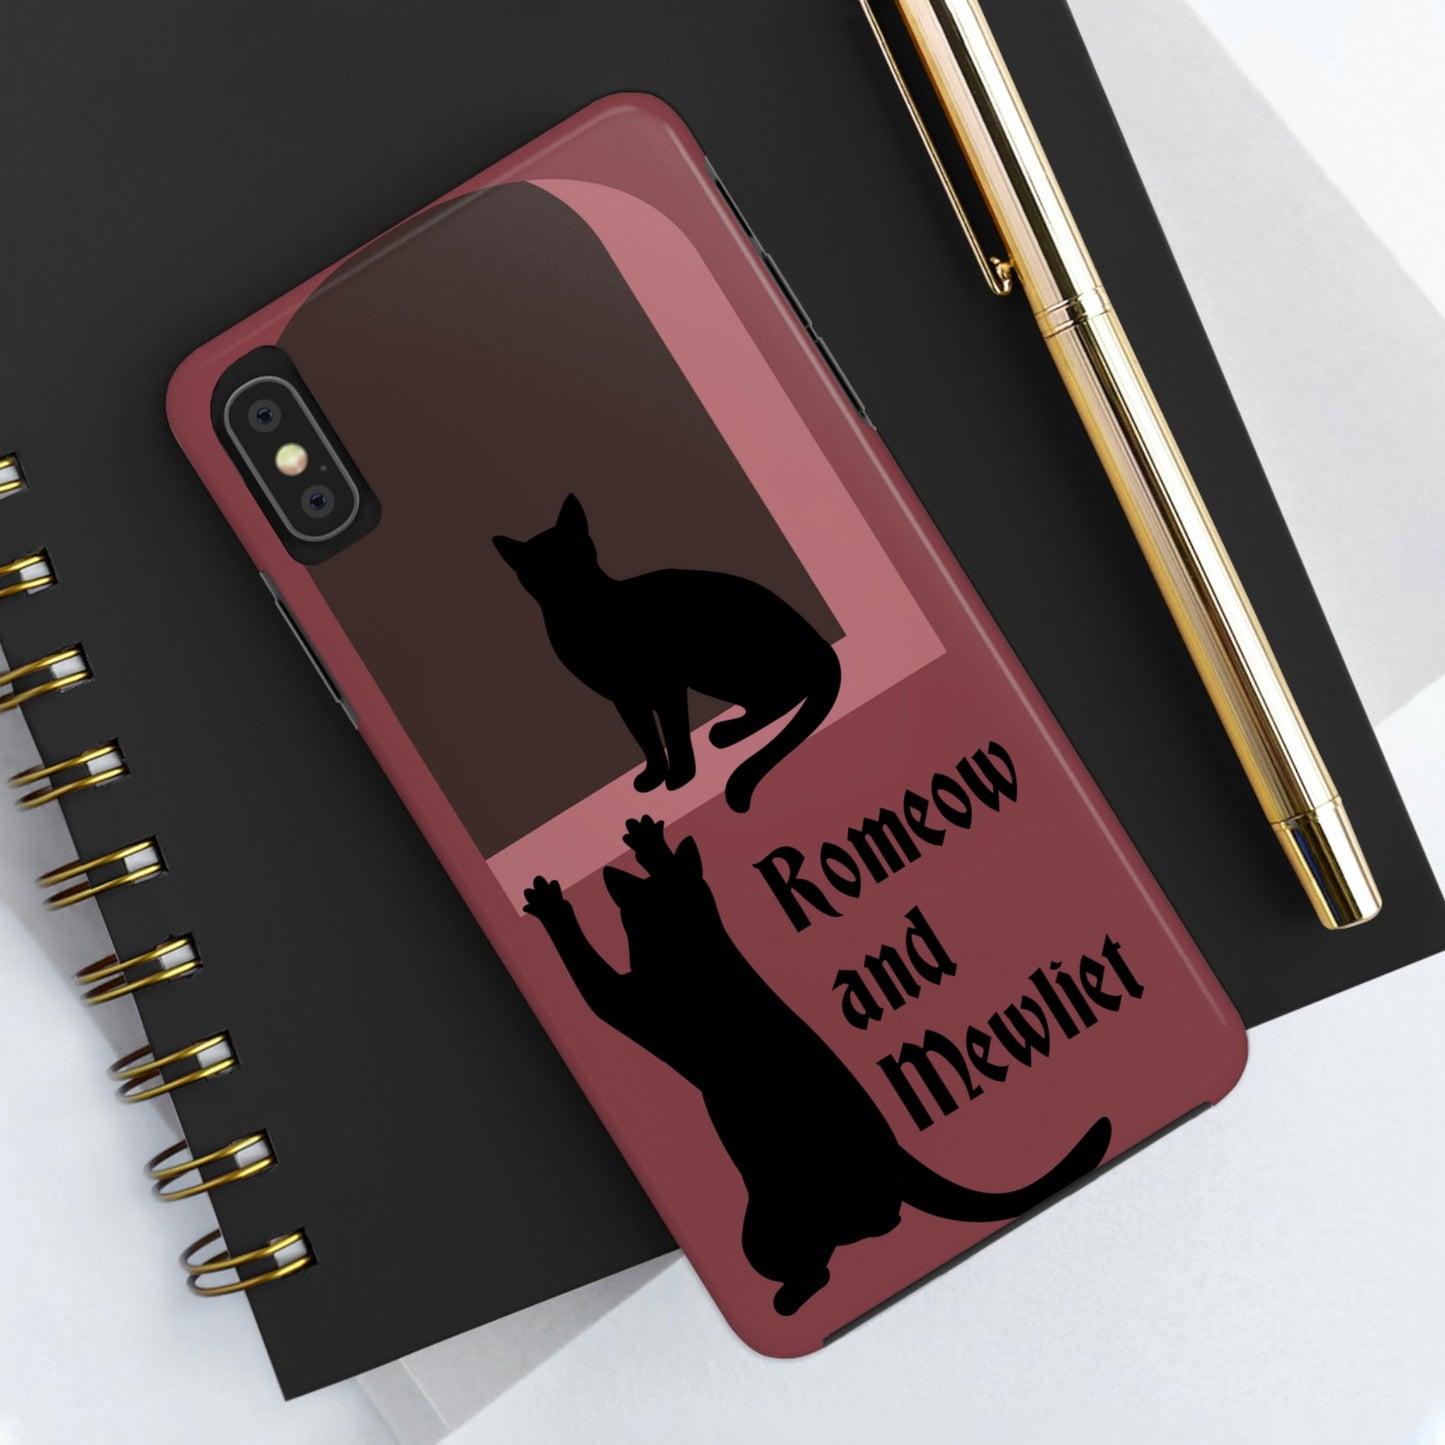 Romeow and Mewliet. William Shakespeare Romeo And Juliet Black Cat Lovers Burgundy Tough Phone Cases Case-Mate Ichaku [Perfect Gifts Selection]